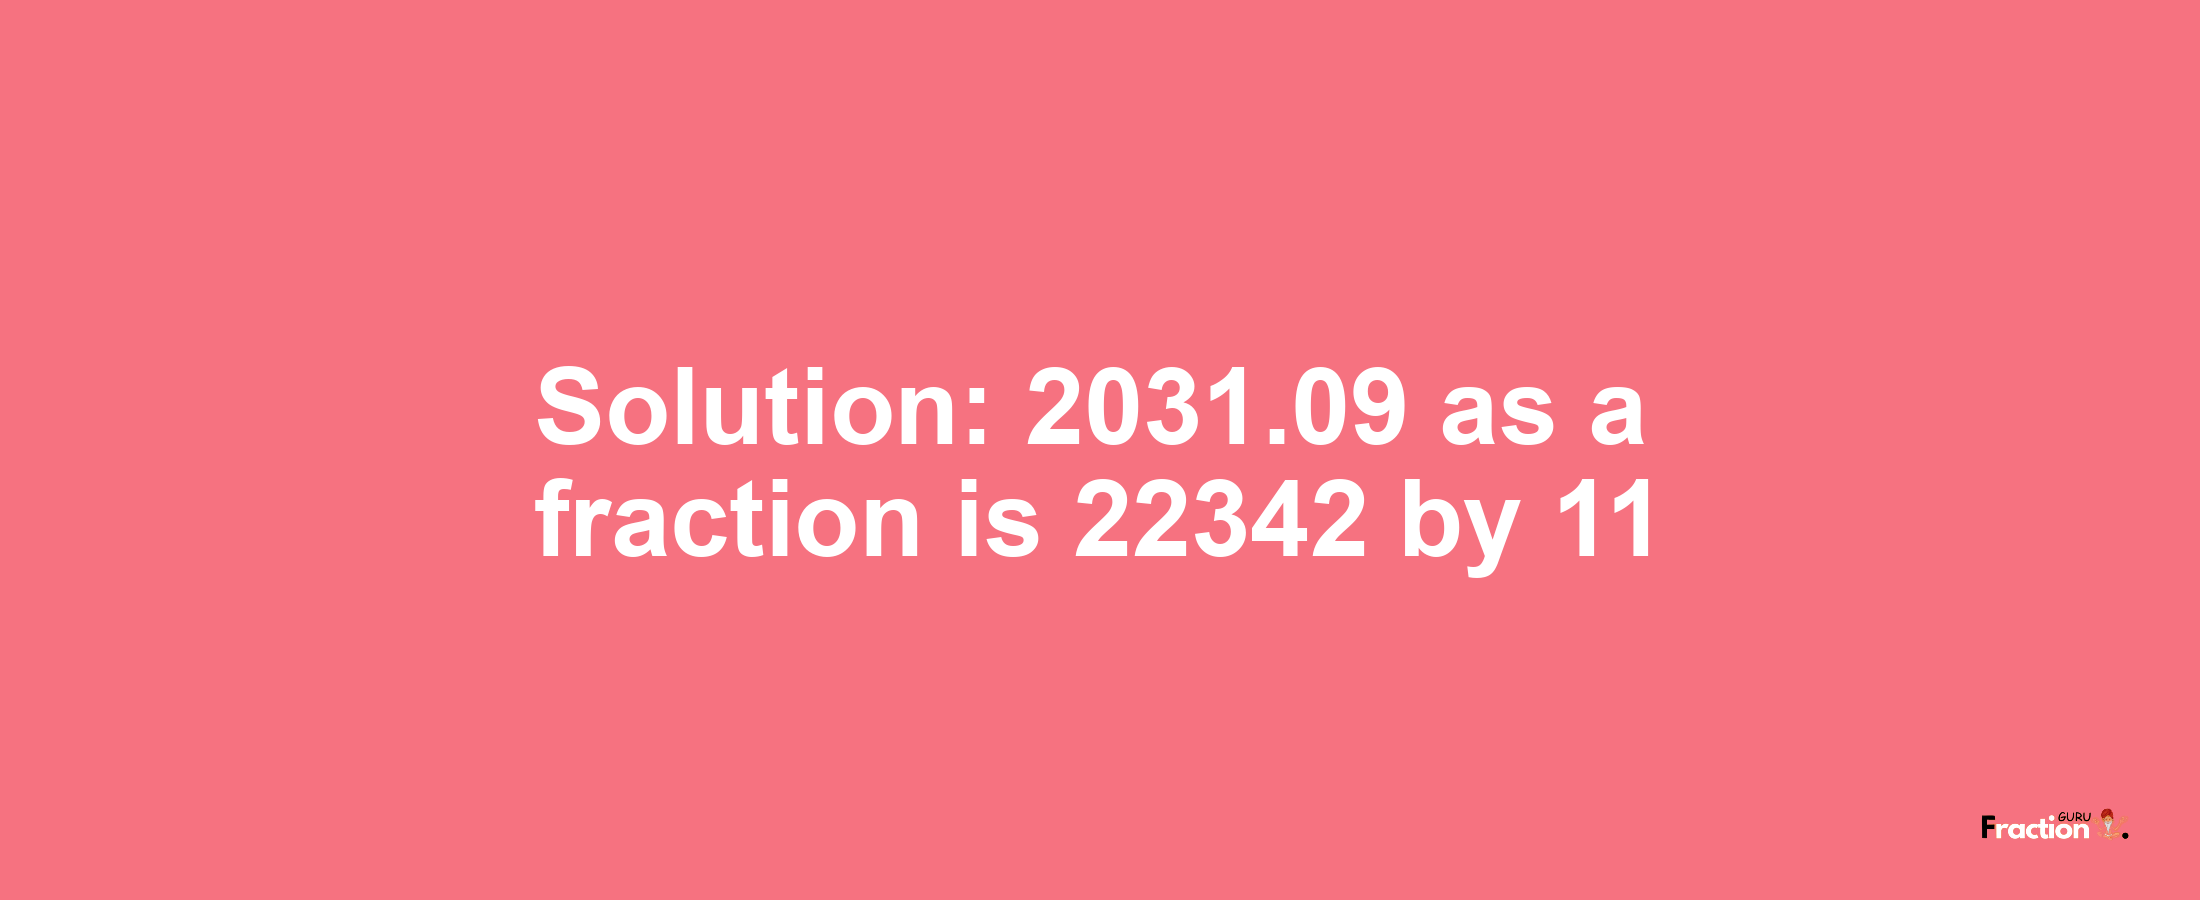 Solution:2031.09 as a fraction is 22342/11